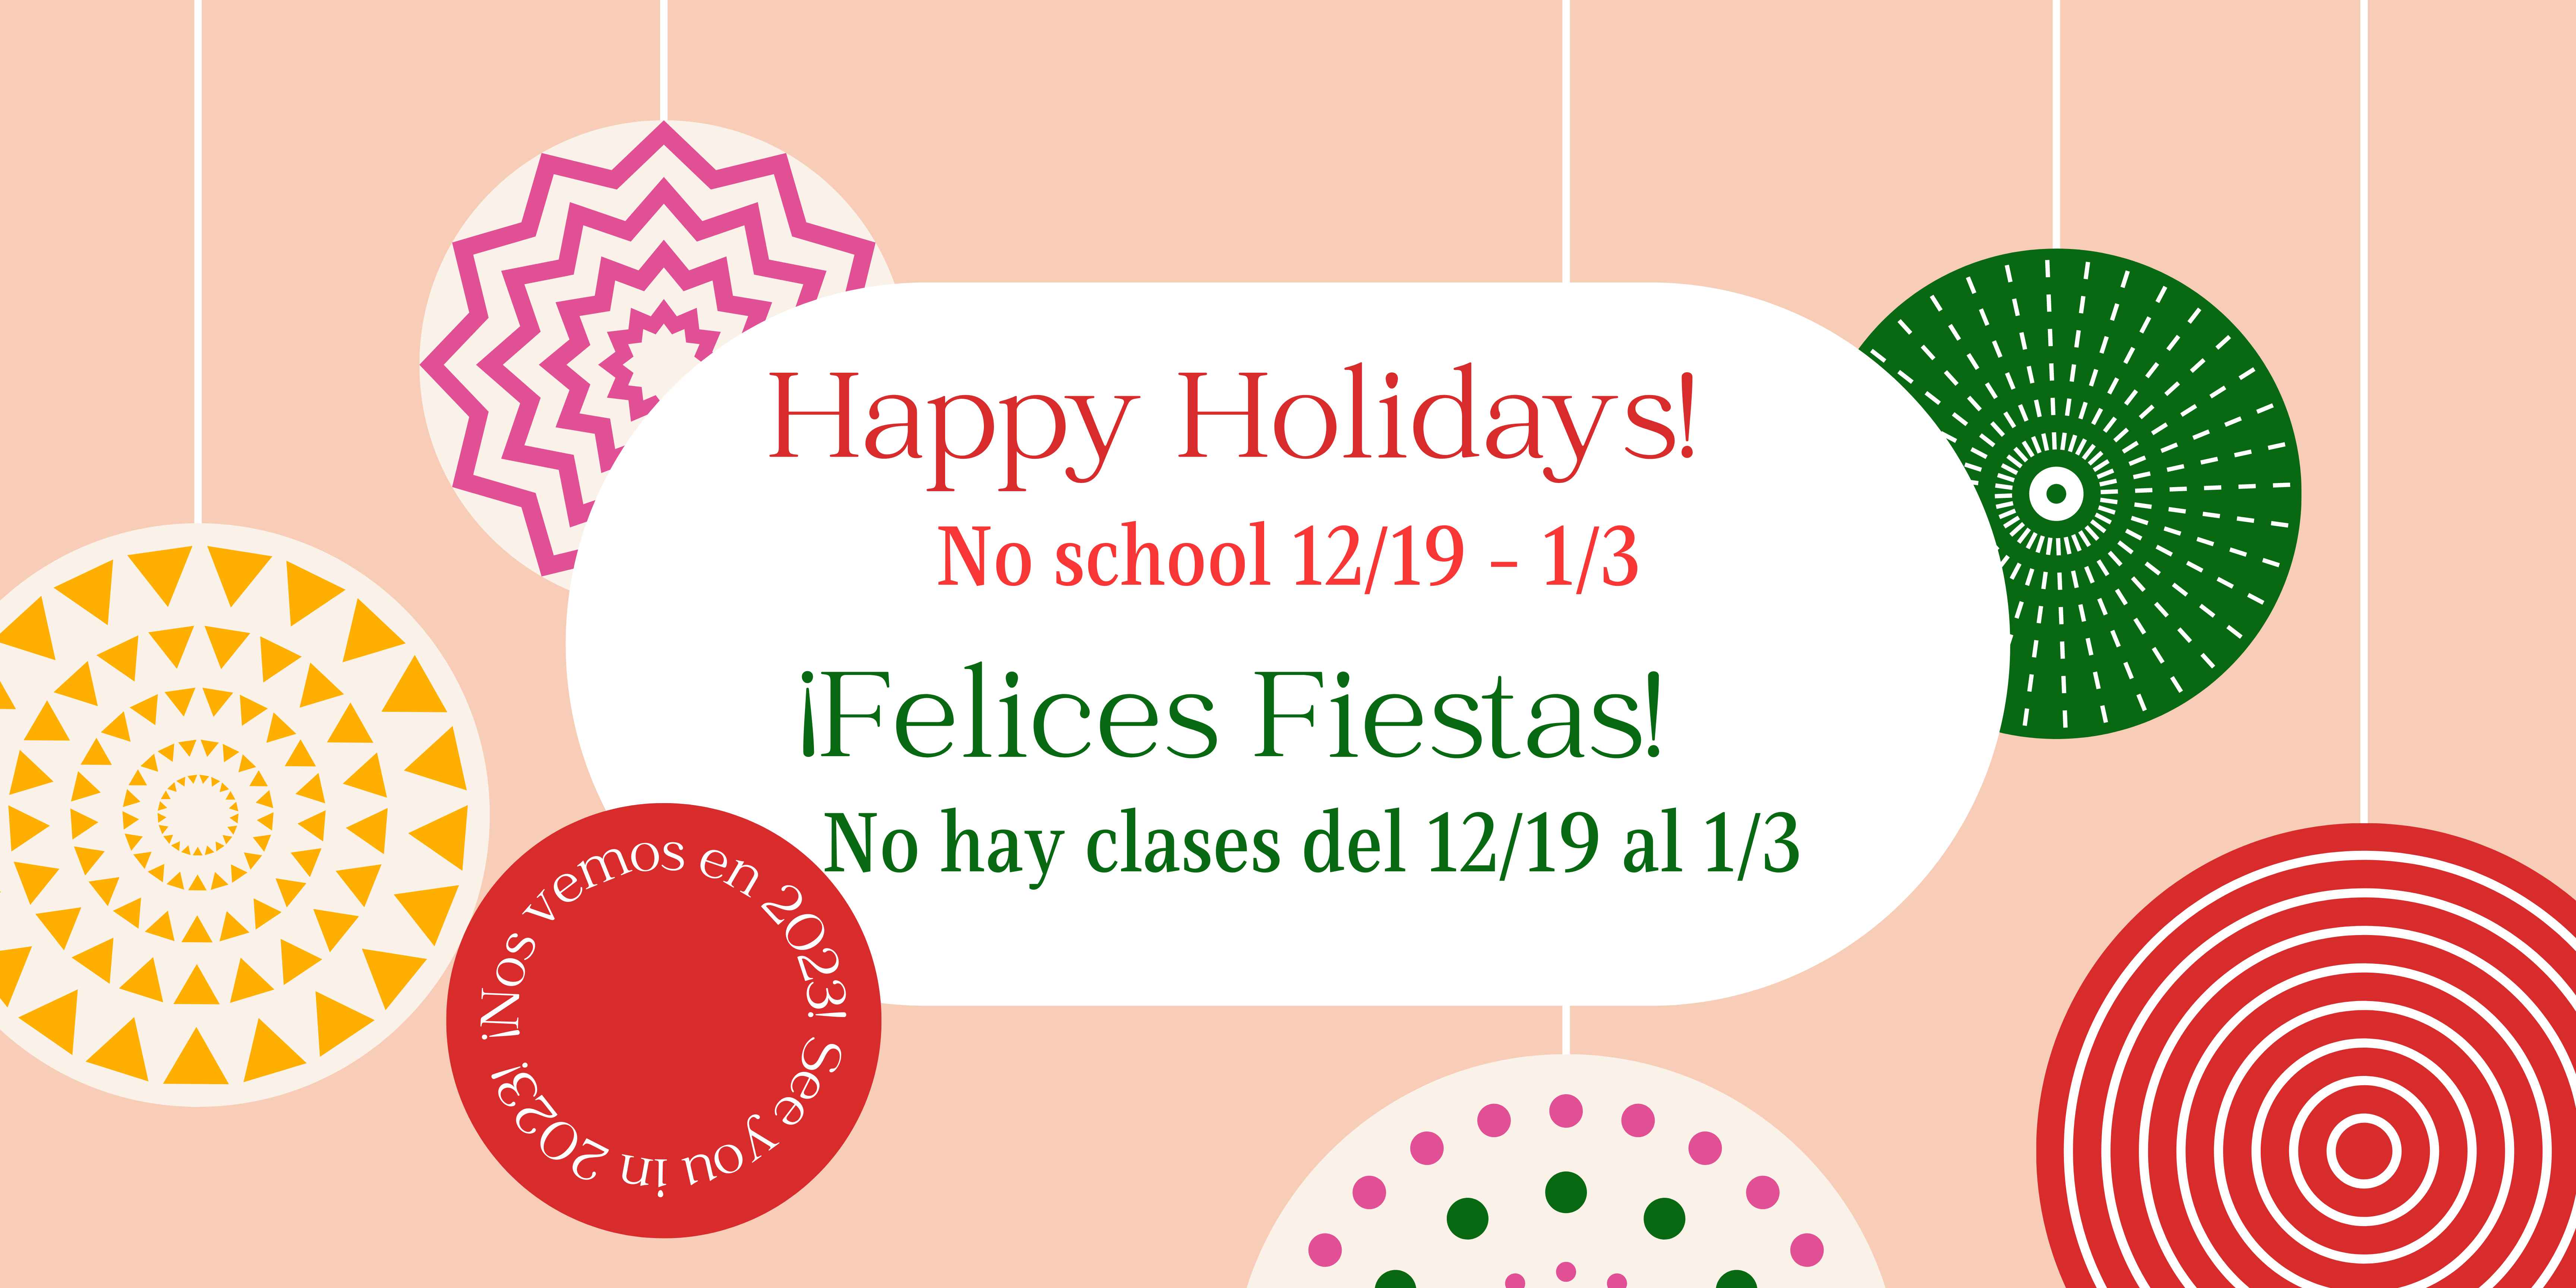 Light pink background with red and green ornaments hanging. Red text says, "Happy Holidays! No school 12/19-1/3." Text says in green, "¡Felices Fiestas! No hay clases del 12/19 al 1/3."